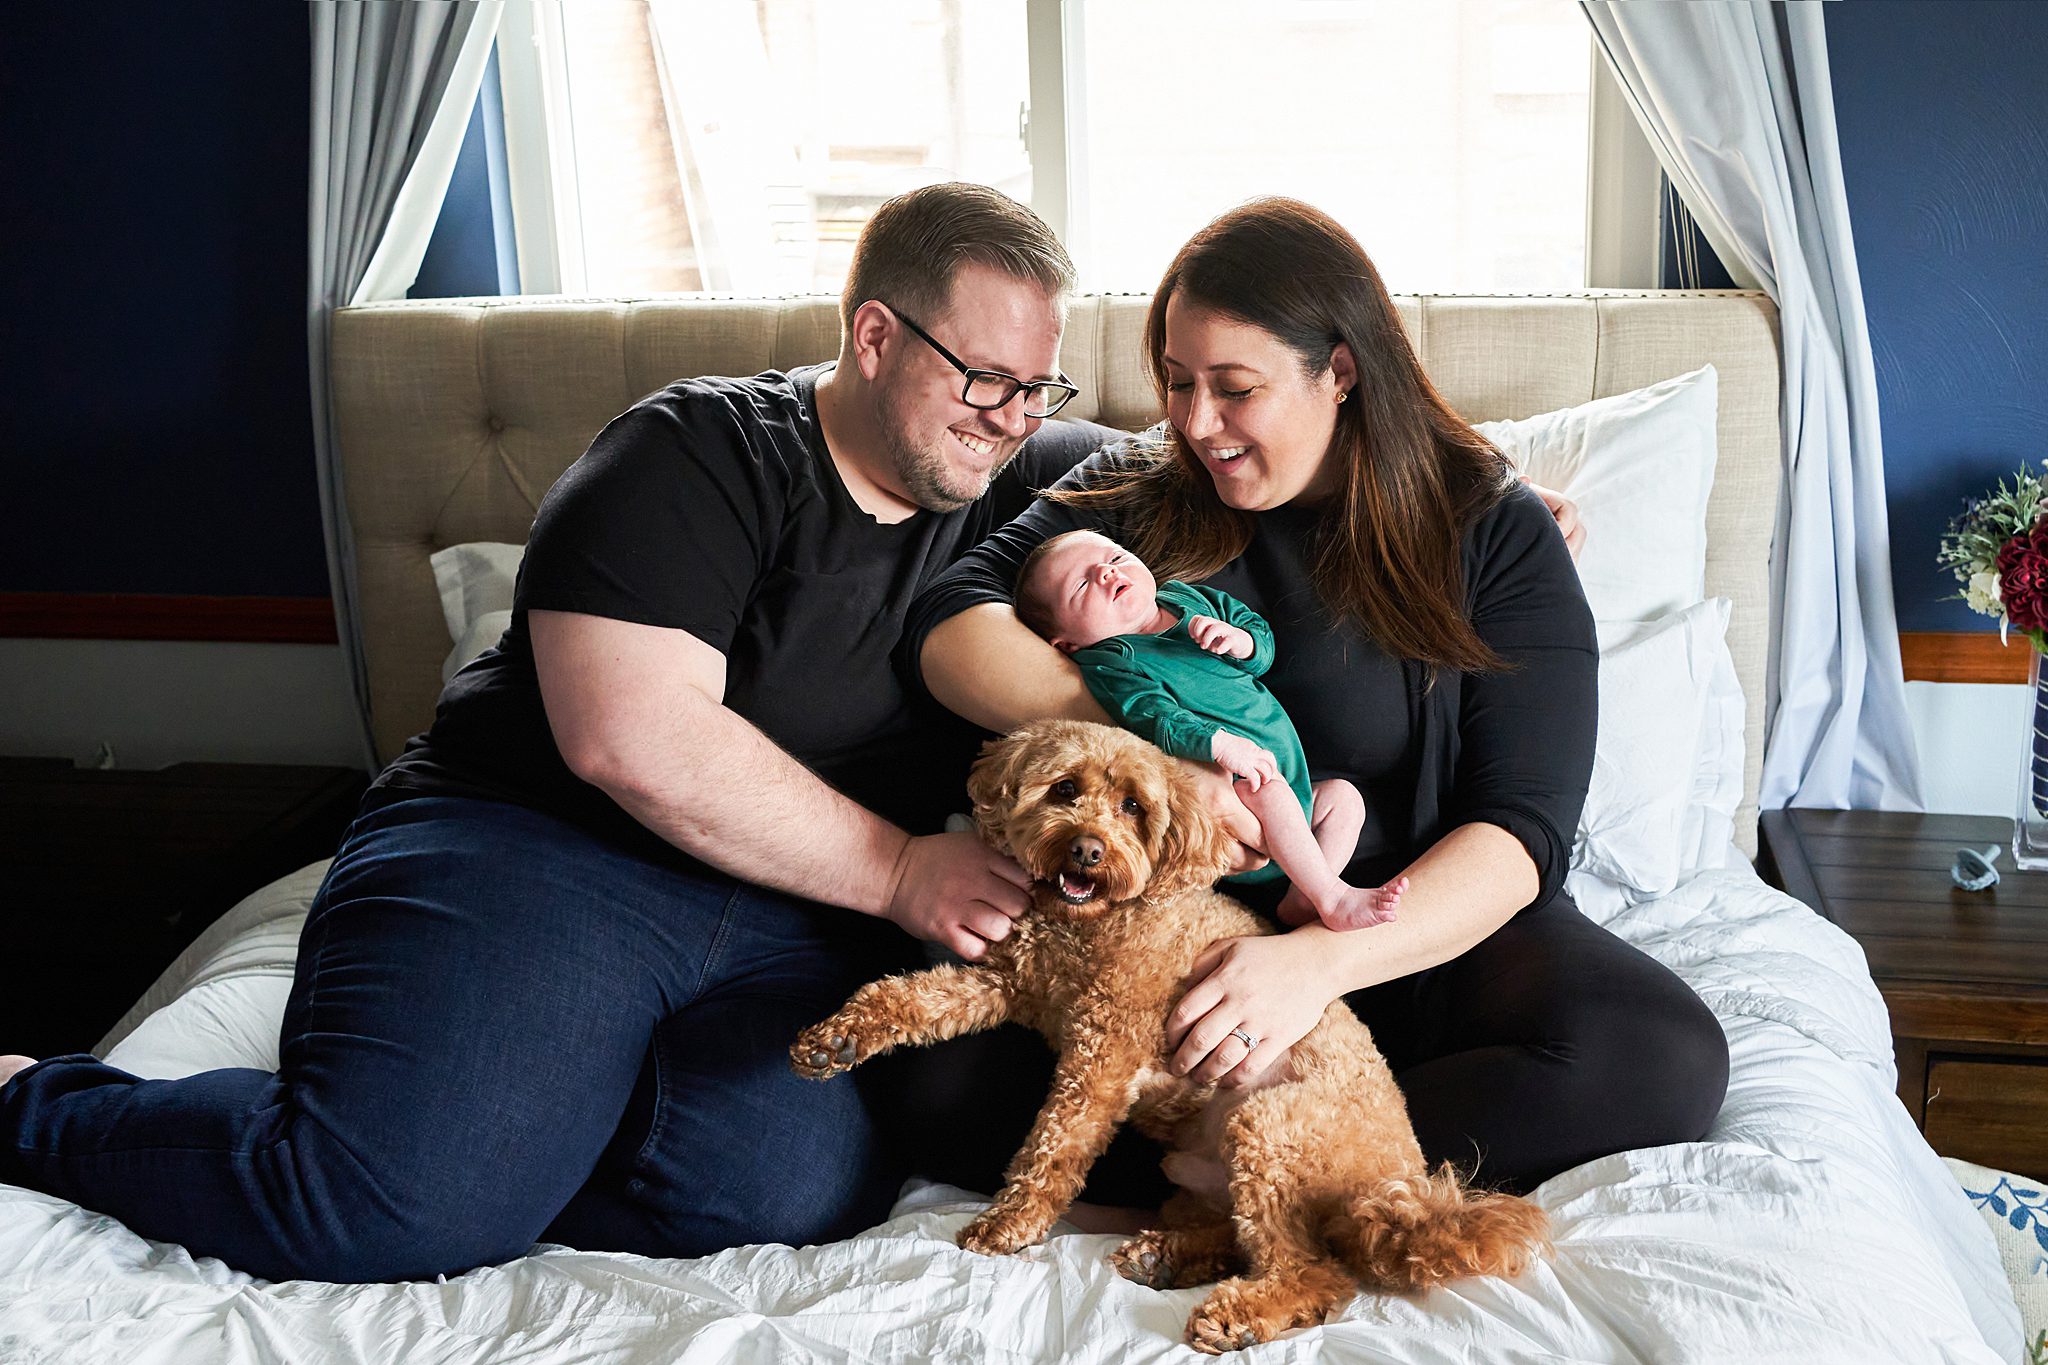 mom and dad on bed with newborn in north hills home with golden doodle dog for a newborn photo session